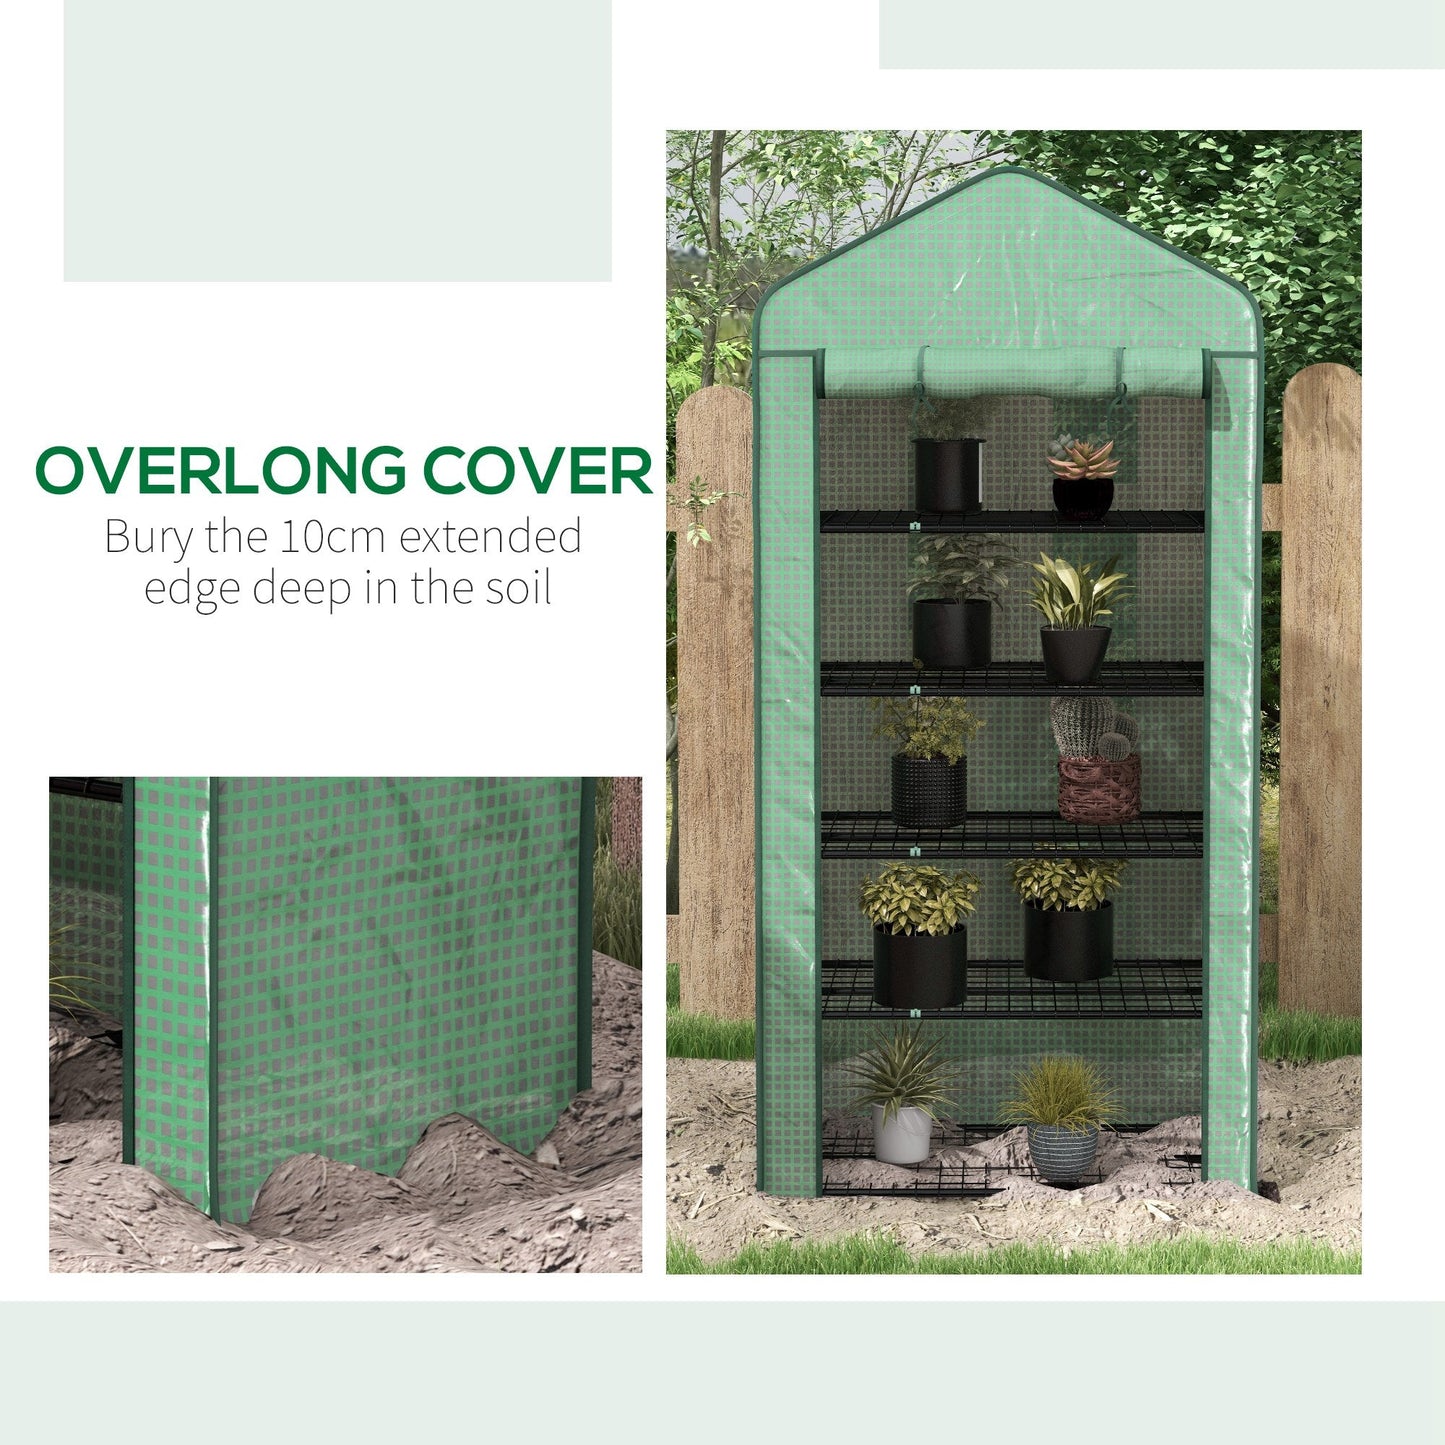 Outsunny Portable Greenhouse: 5-Tier Shelving, Reinforced PE Cover, Roll-up Door, Green